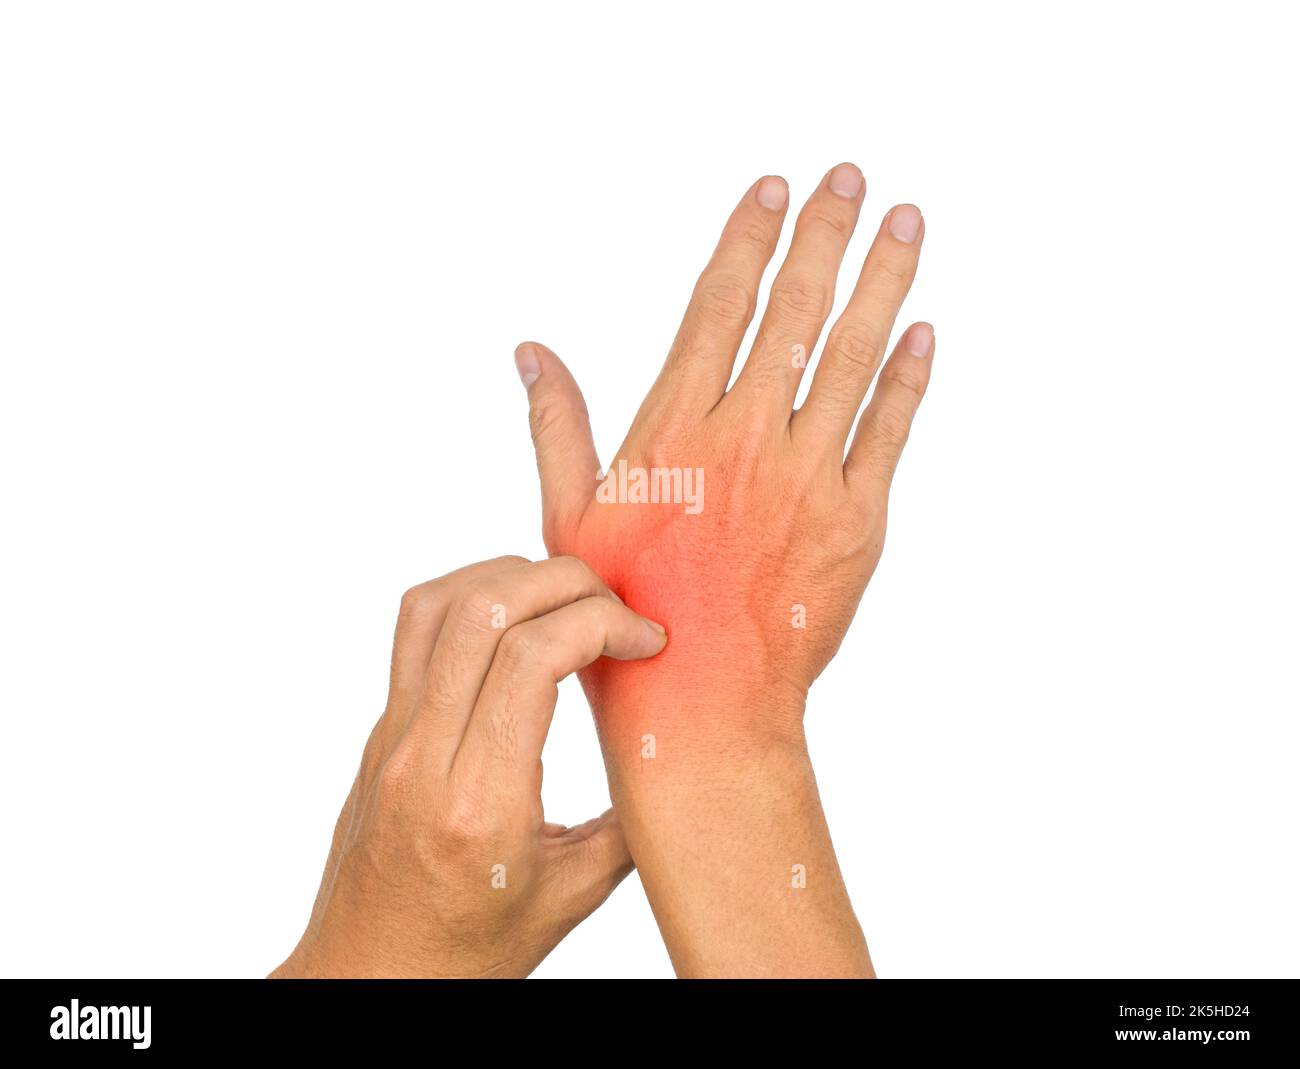 Asian young man scratching his hand. Concept of itchy skin diseases such as scabies, fungal infection, eczema, psoriasis, allergy, etc. Stock Photo